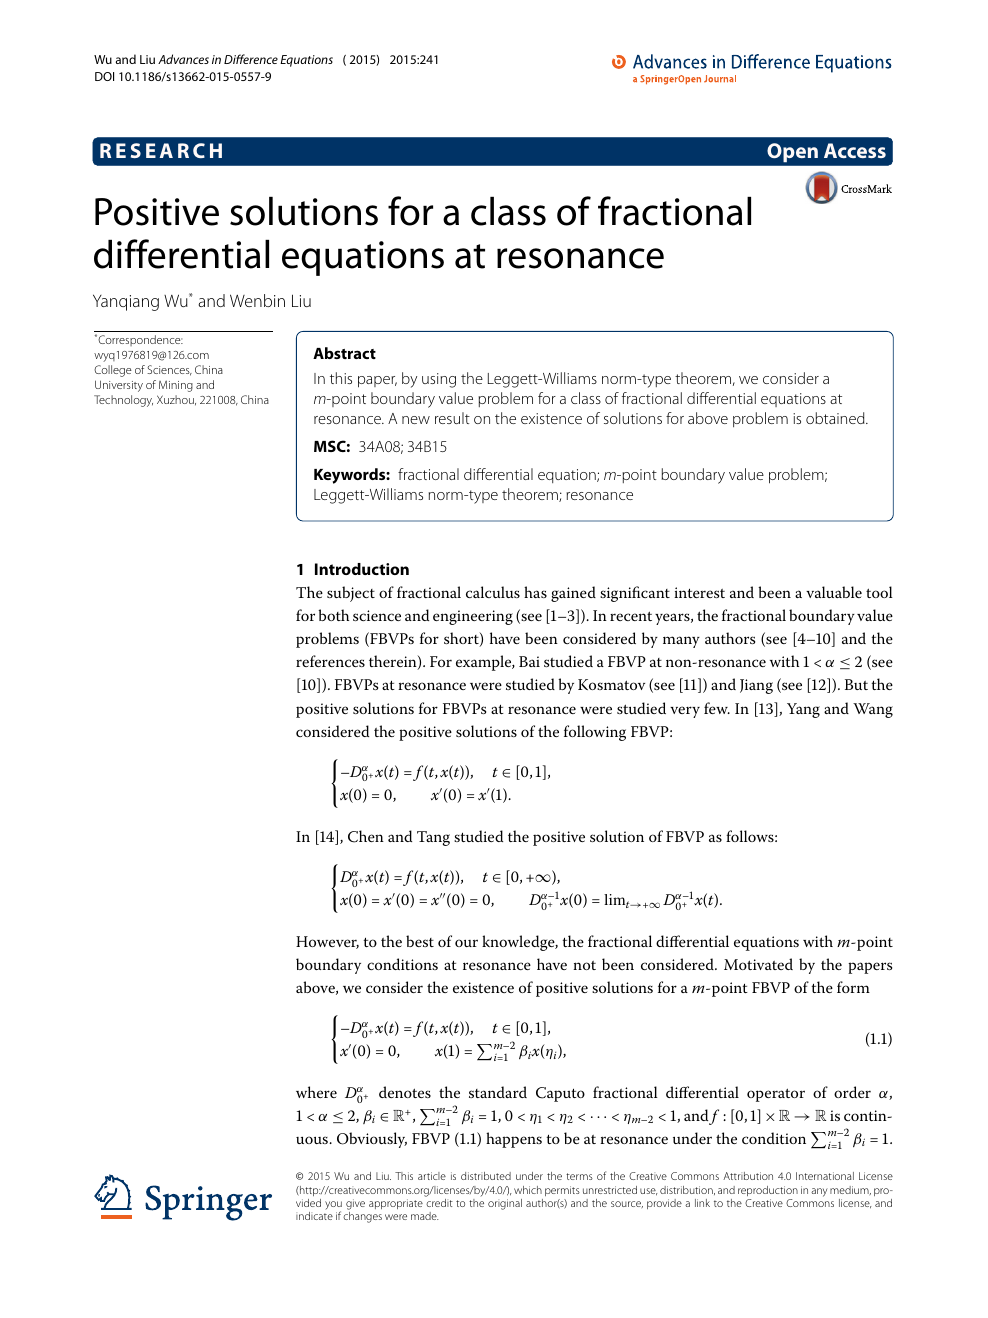 Positive Solutions For A Class Of Fractional Differential Equations At Resonance Topic Of Research Paper In Mathematics Download Scholarly Article Pdf And Read For Free On Cyberleninka Open Science Hub